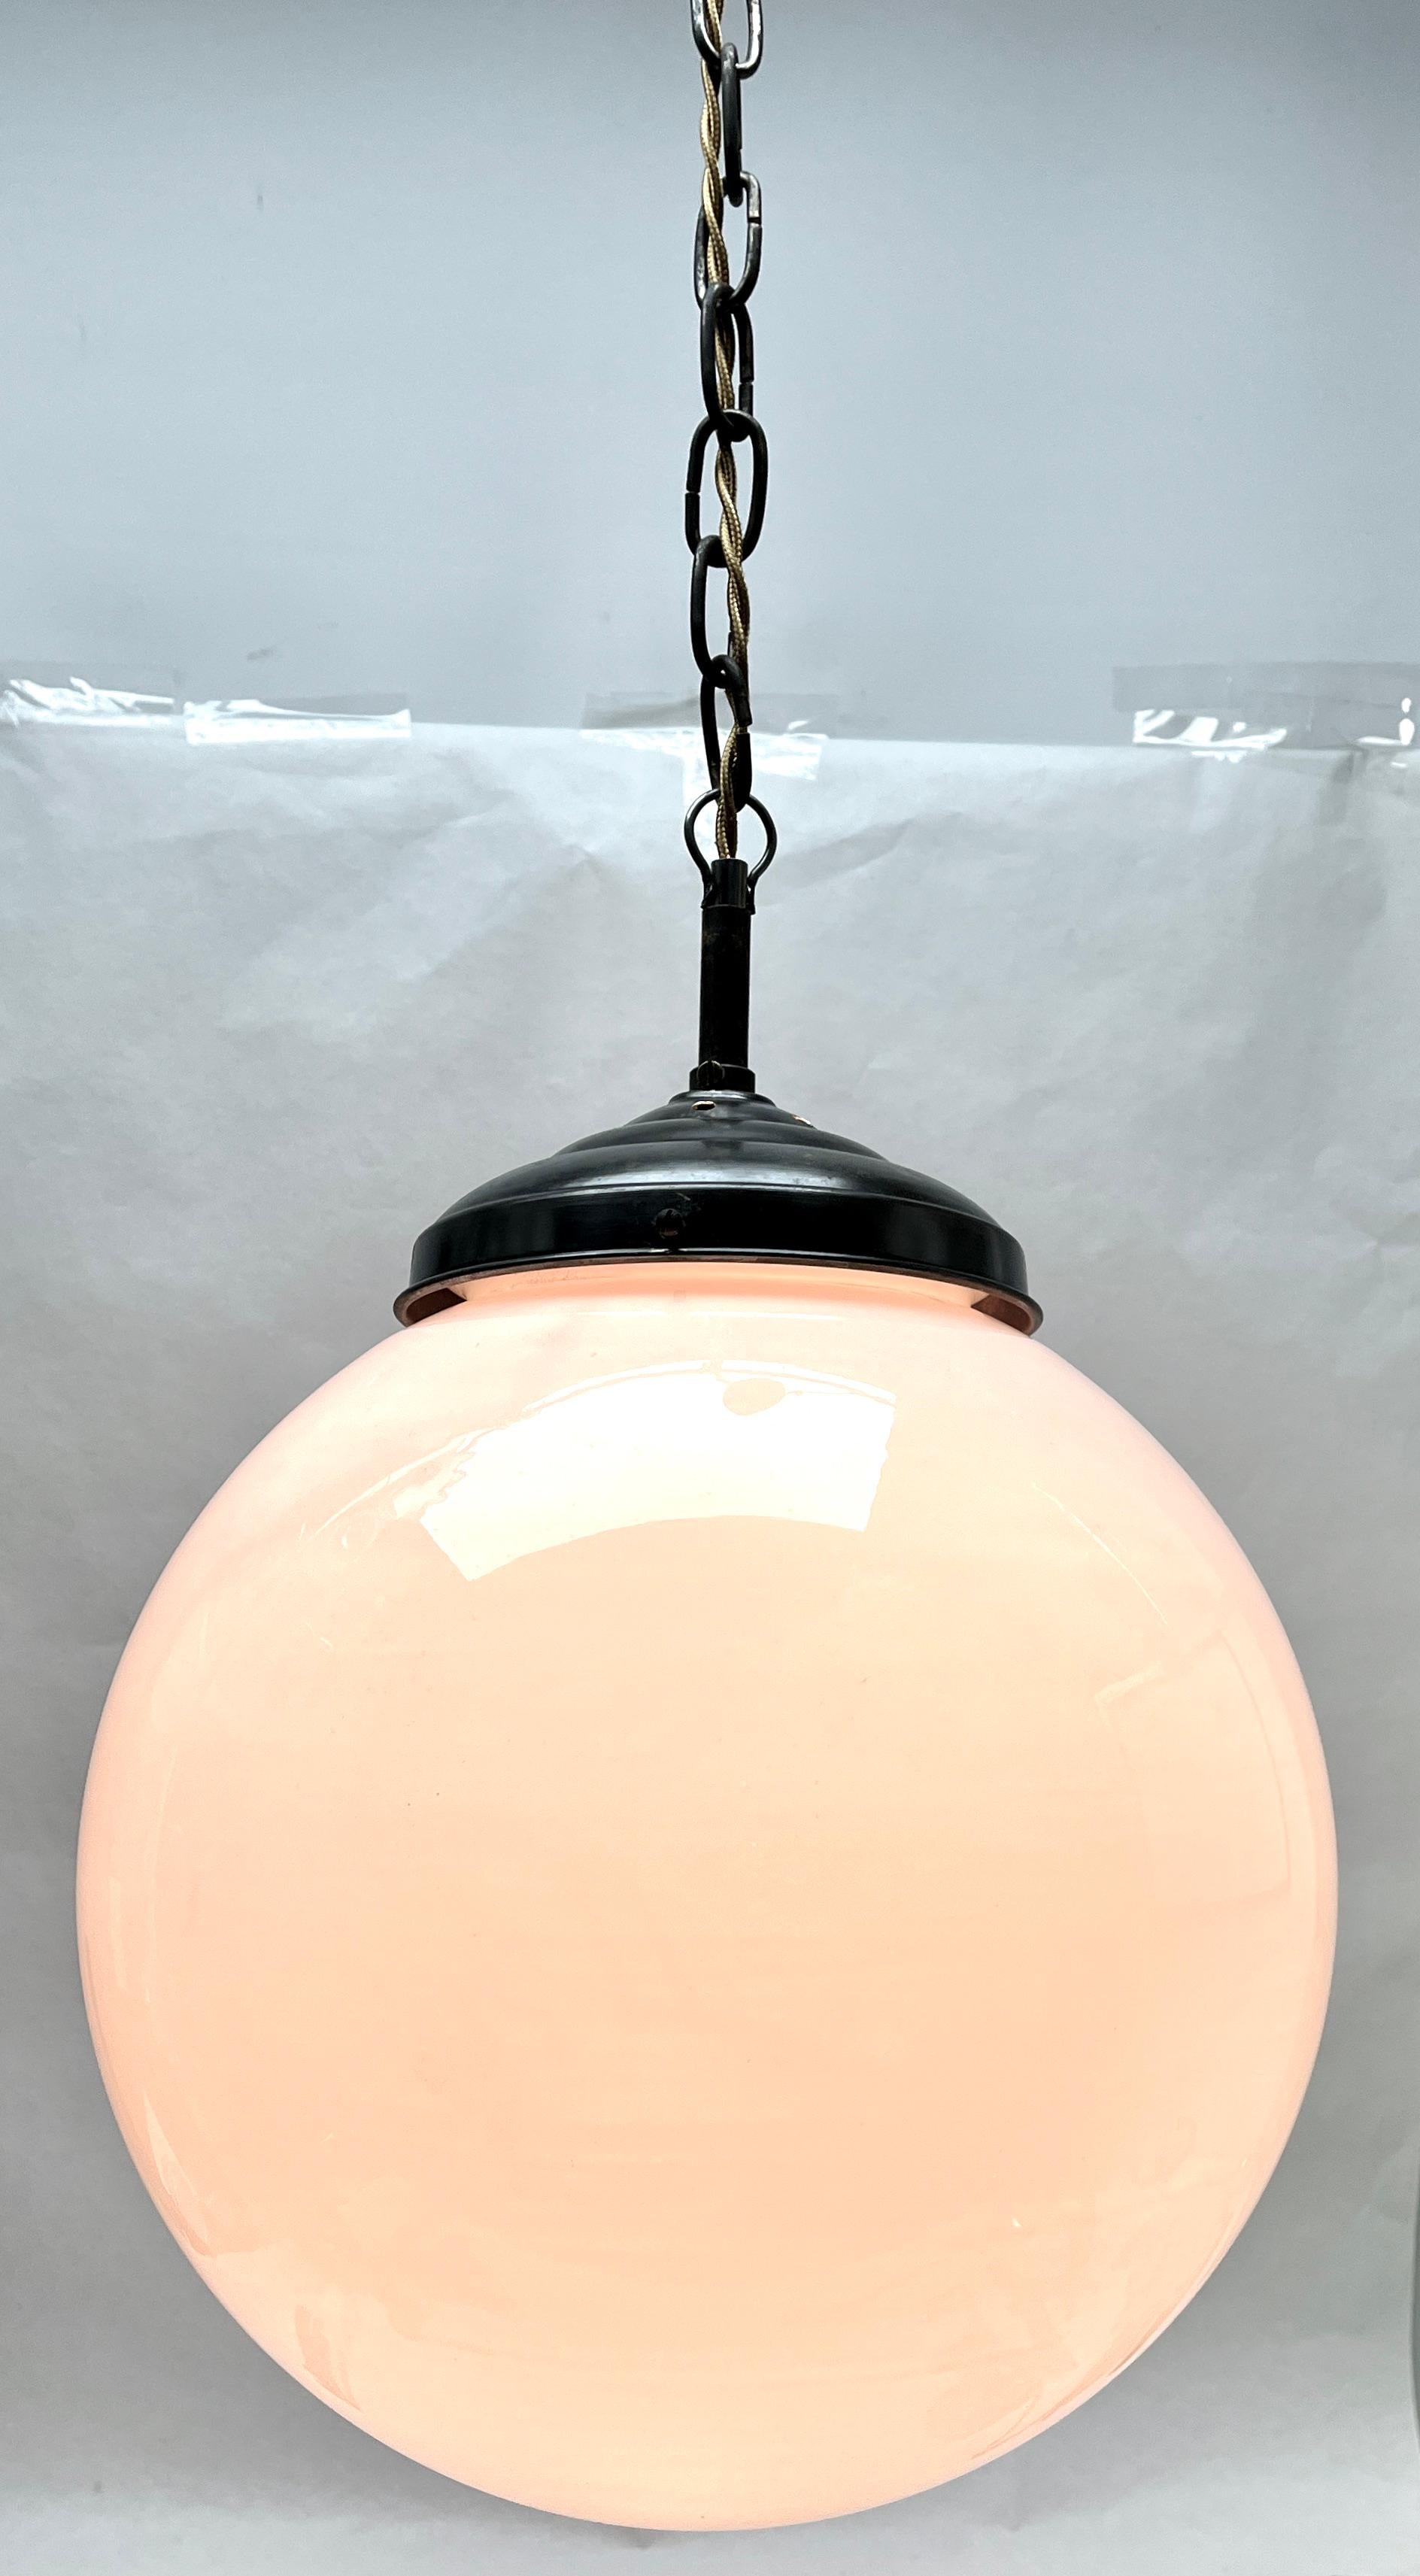 Dutch Pair of Pendant Lamps with Large Opaline Shade, 1930s, Netherlands